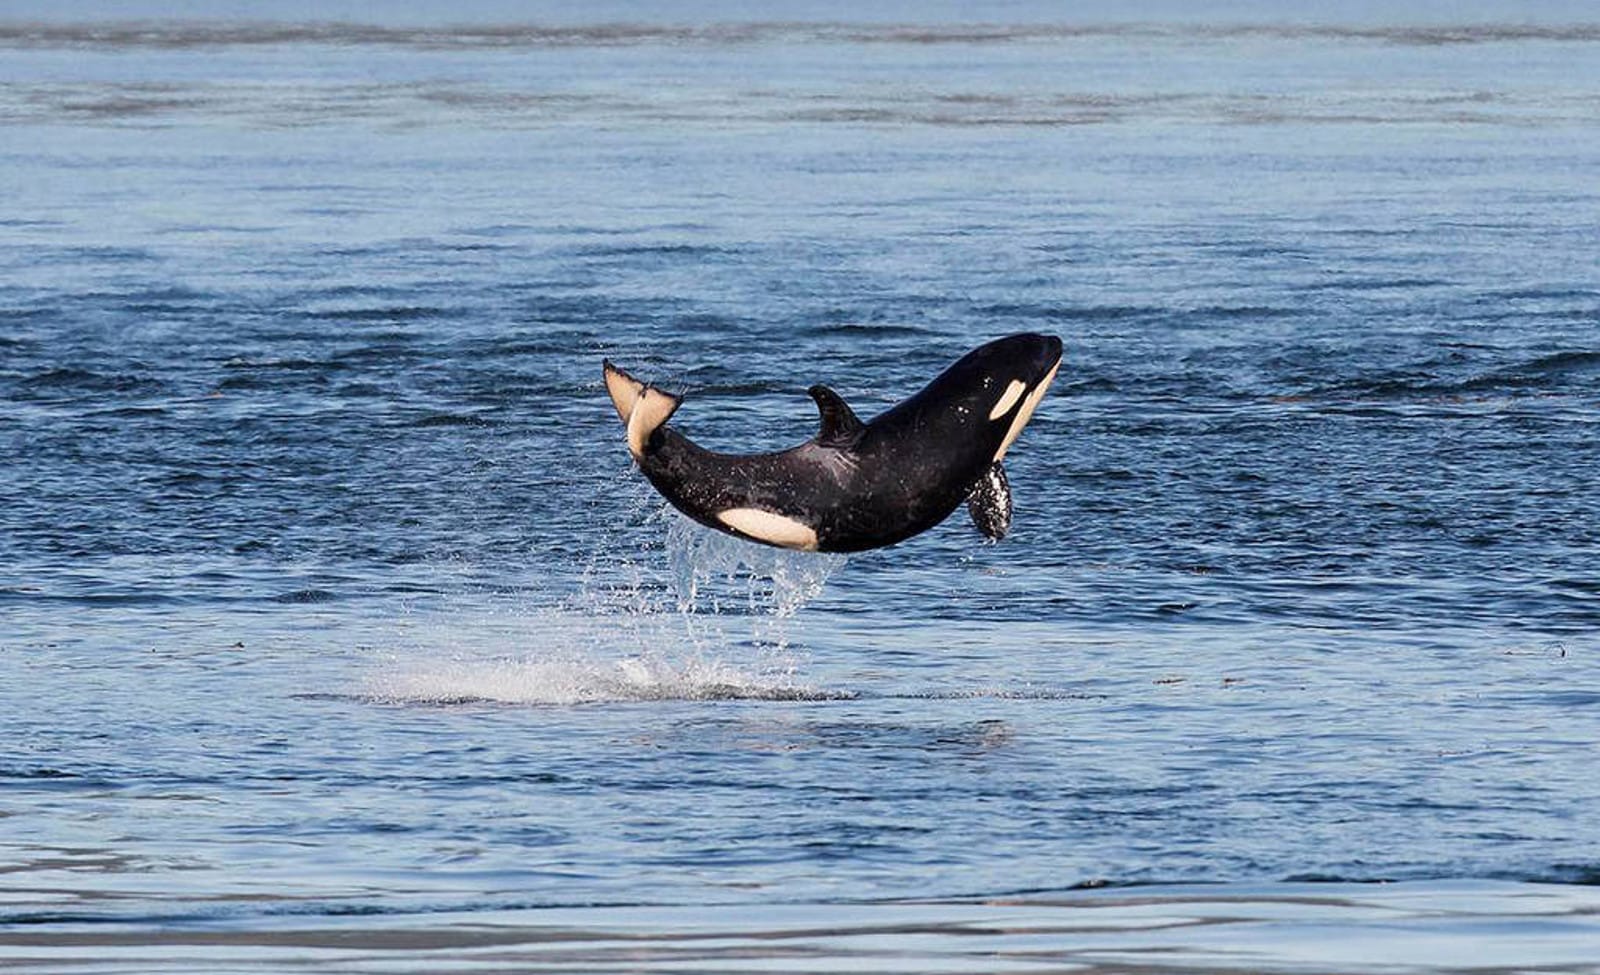 How an Orca Baby Boom Is Promising News For An Endangered Pod